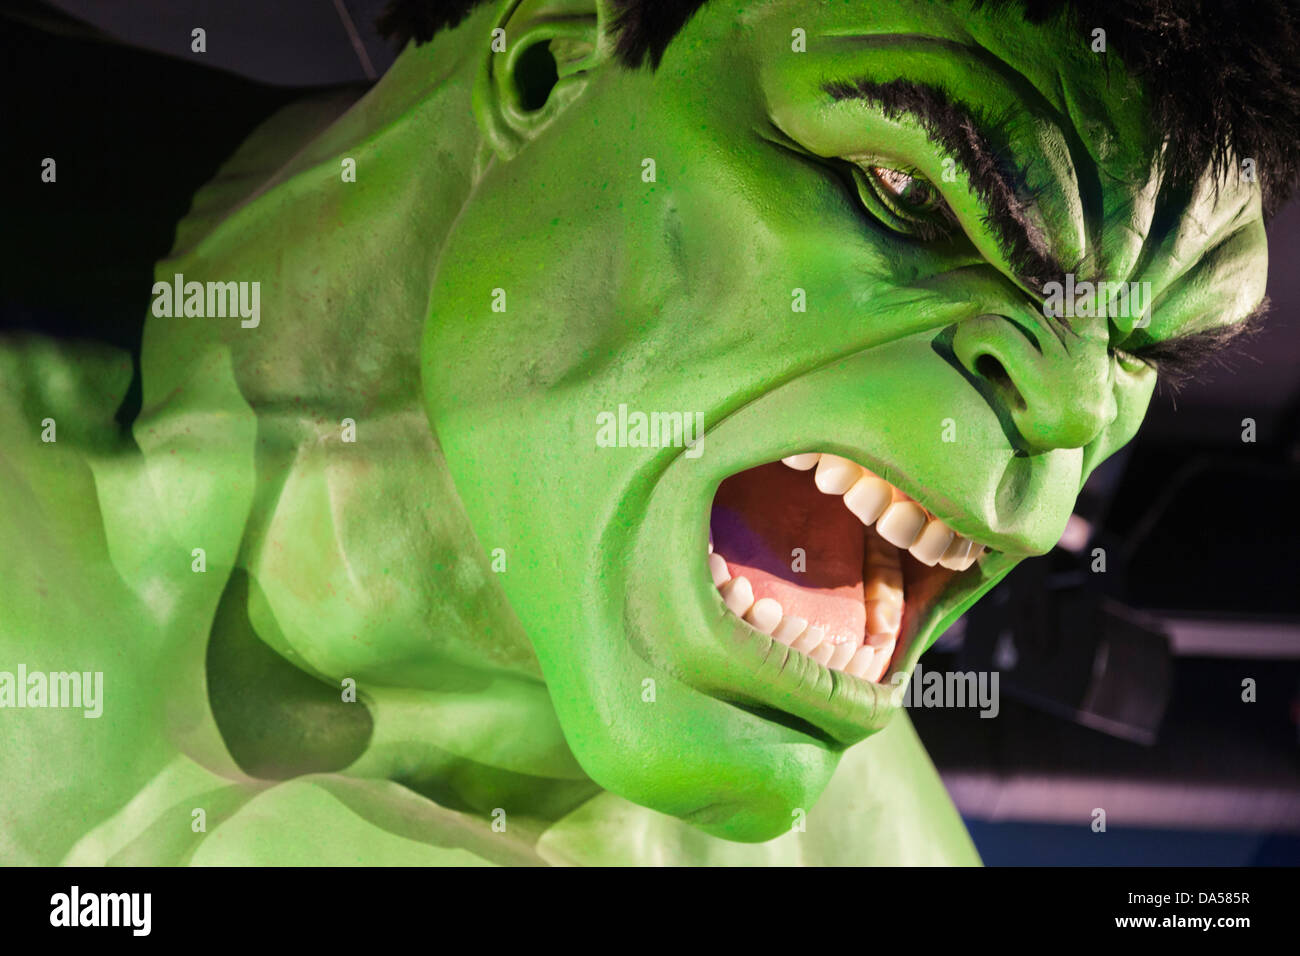 England, London, Madame Tussauds, Marvel Super Heroes Command Centre, Statue of The Incredible Hulk Stock Photo